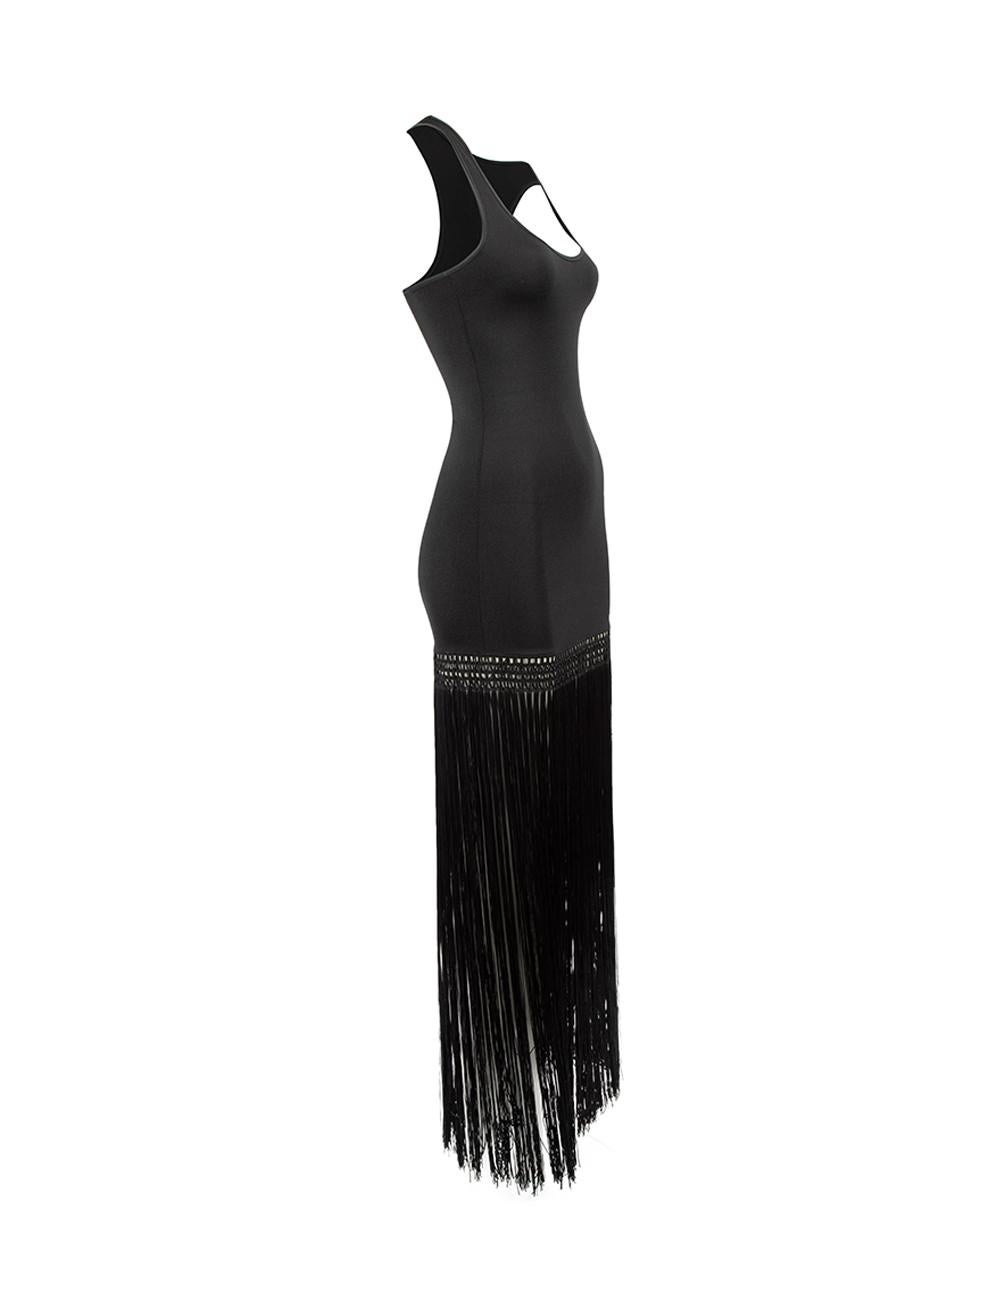 CONDITION is Very good. Hardly any visible wear to dress is evident on this used Agent Provocateur designer resale item.



Details


Black

Polyamide

Elastane

Figure-hugging

Tassel detail

Sleeveless

Round neck

Slip on fastening





Made in